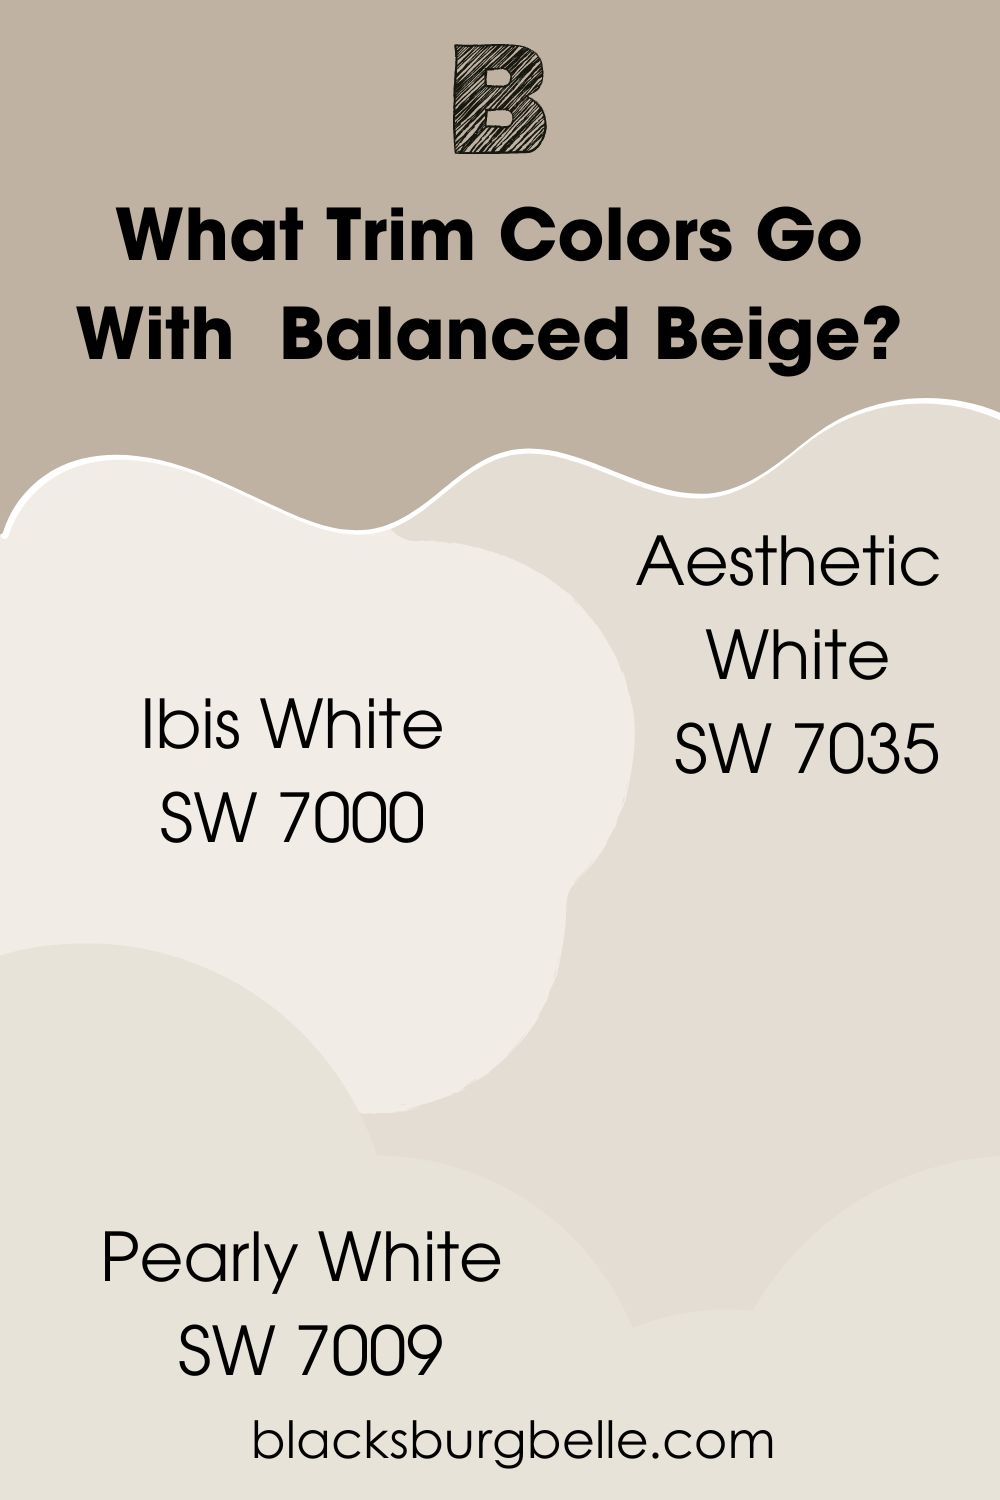 What Trim Colors Go With Sherwin-Williams Balanced Beige